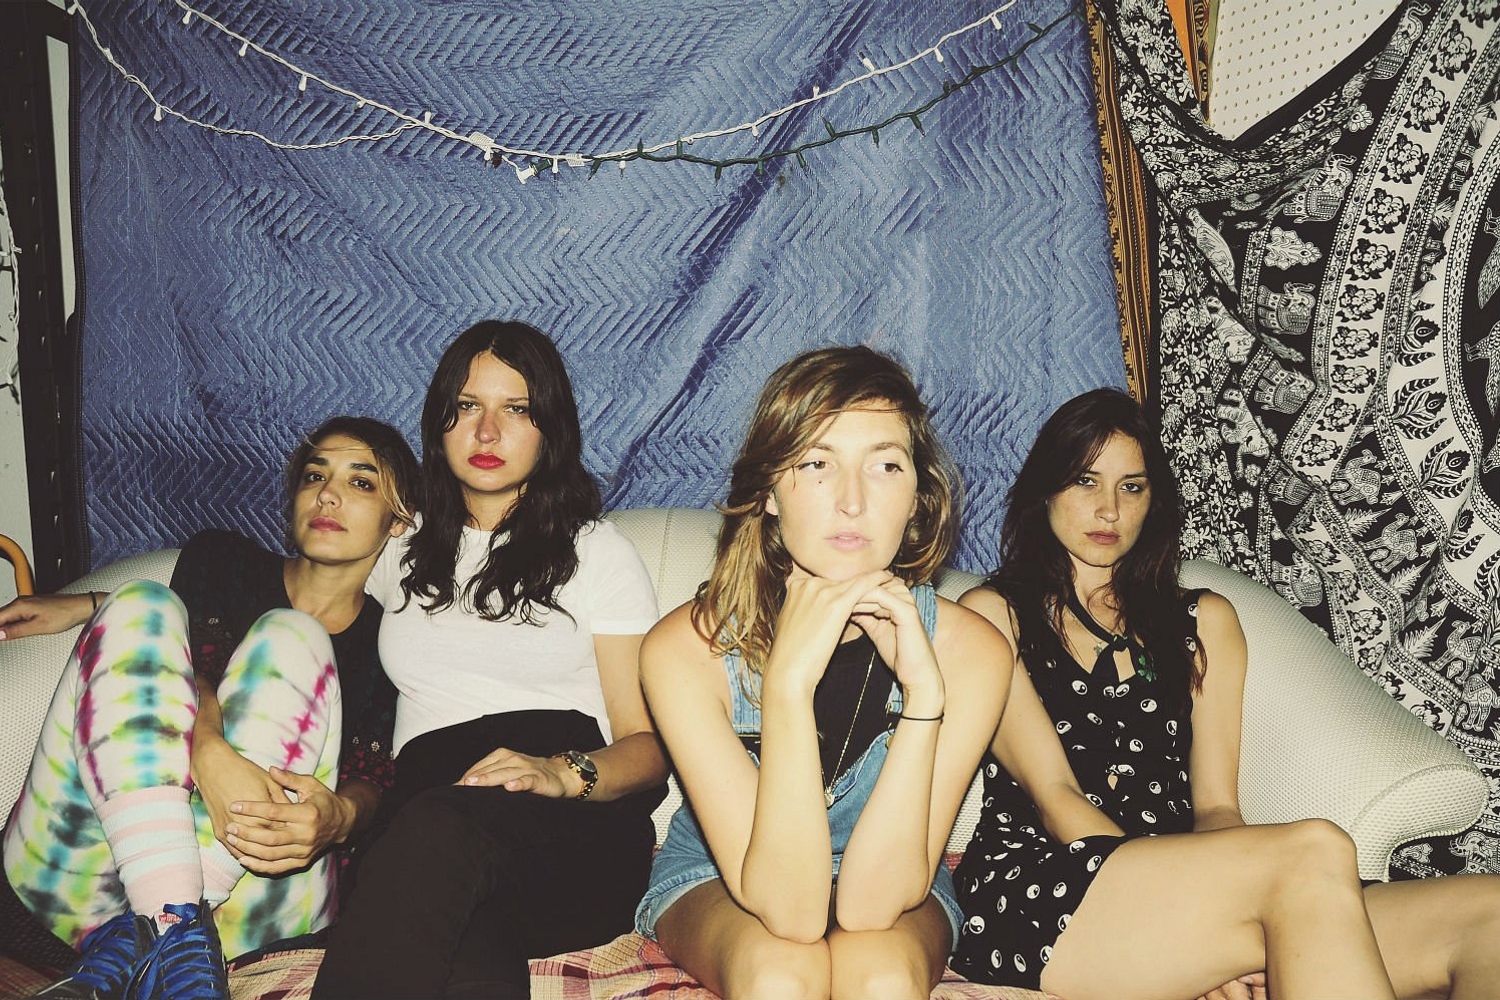 Warpaint take on your questions in DIY’s Popstar Postbag